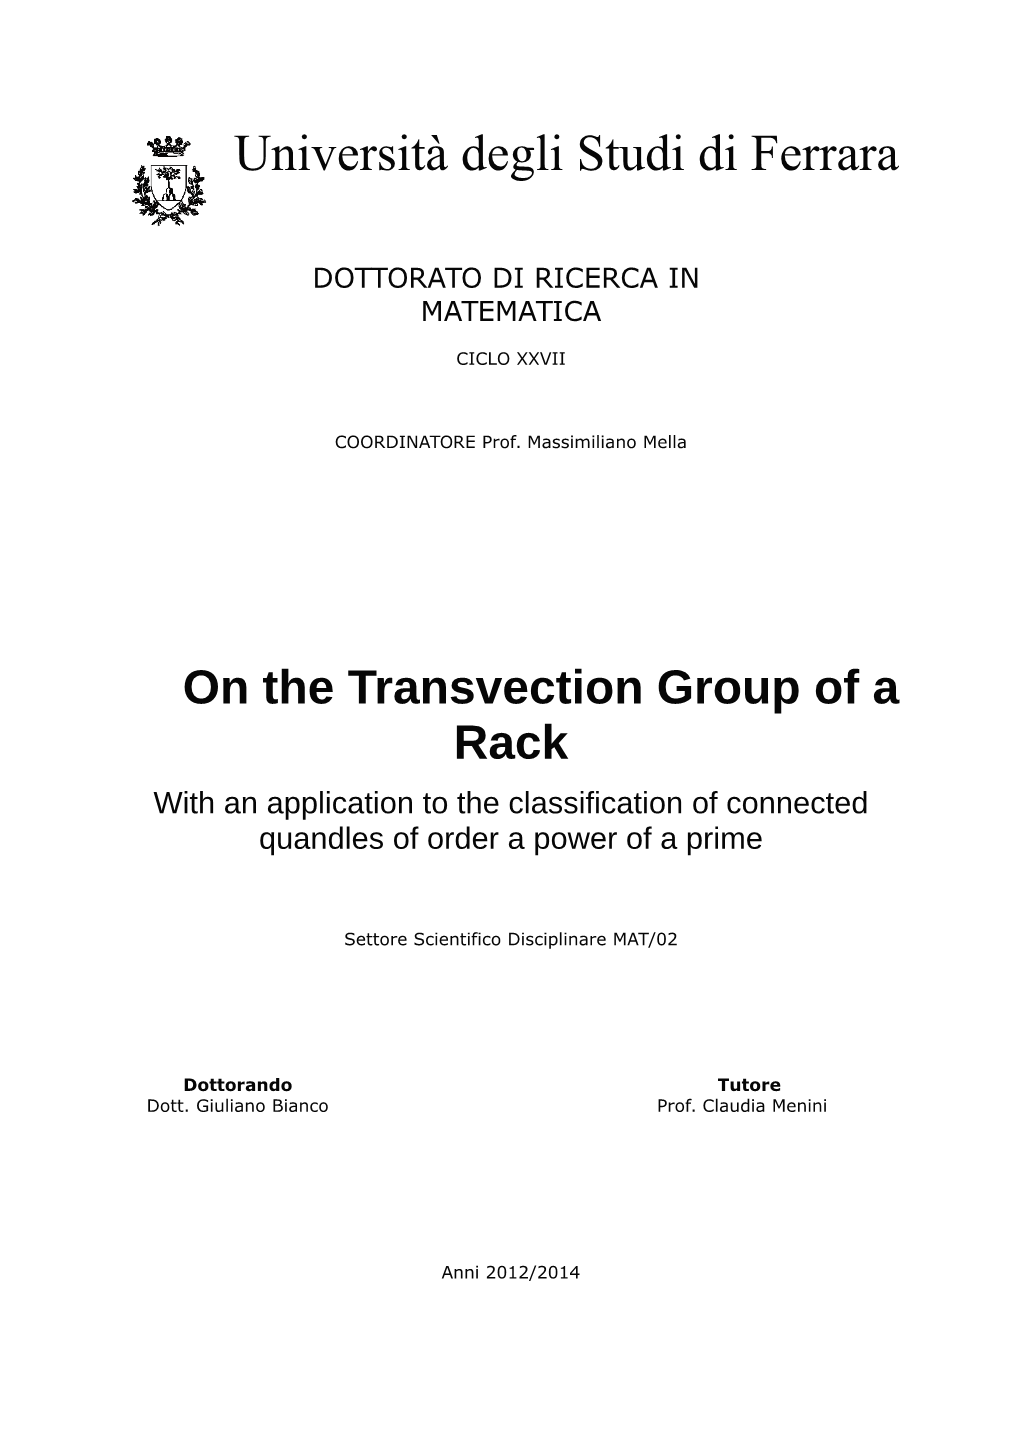 On the Transvection Group of a Rack